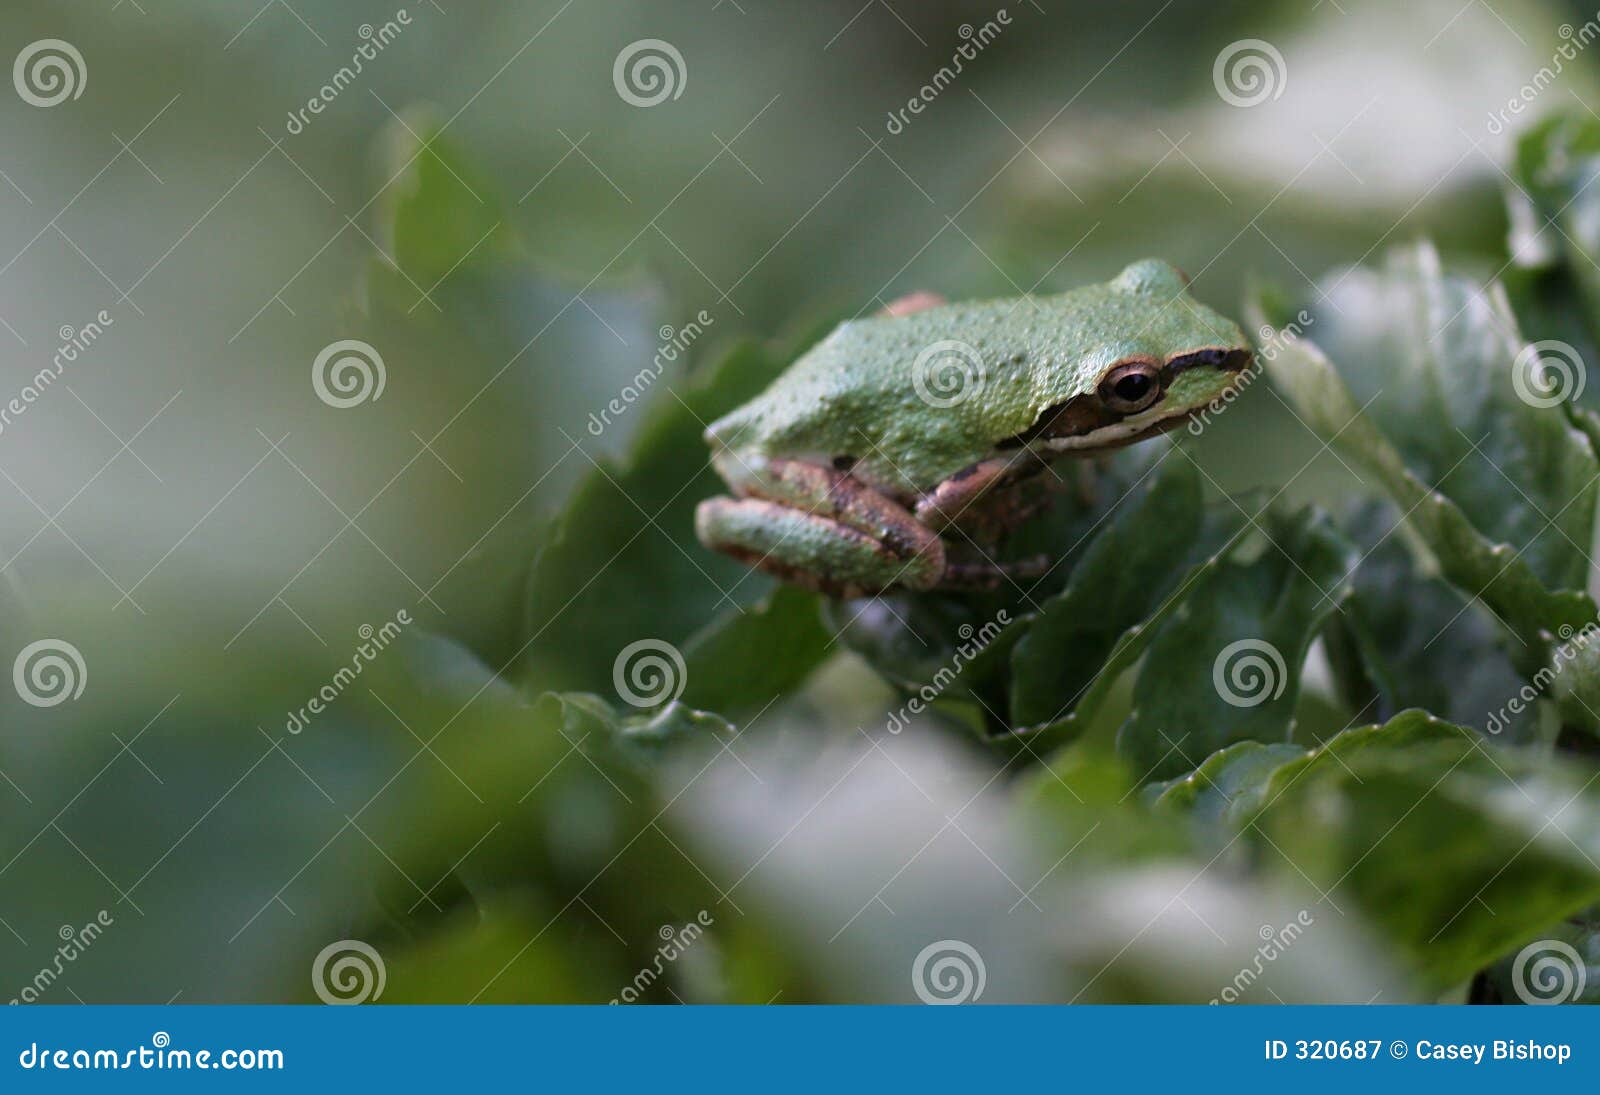 pacific tree frog - 1